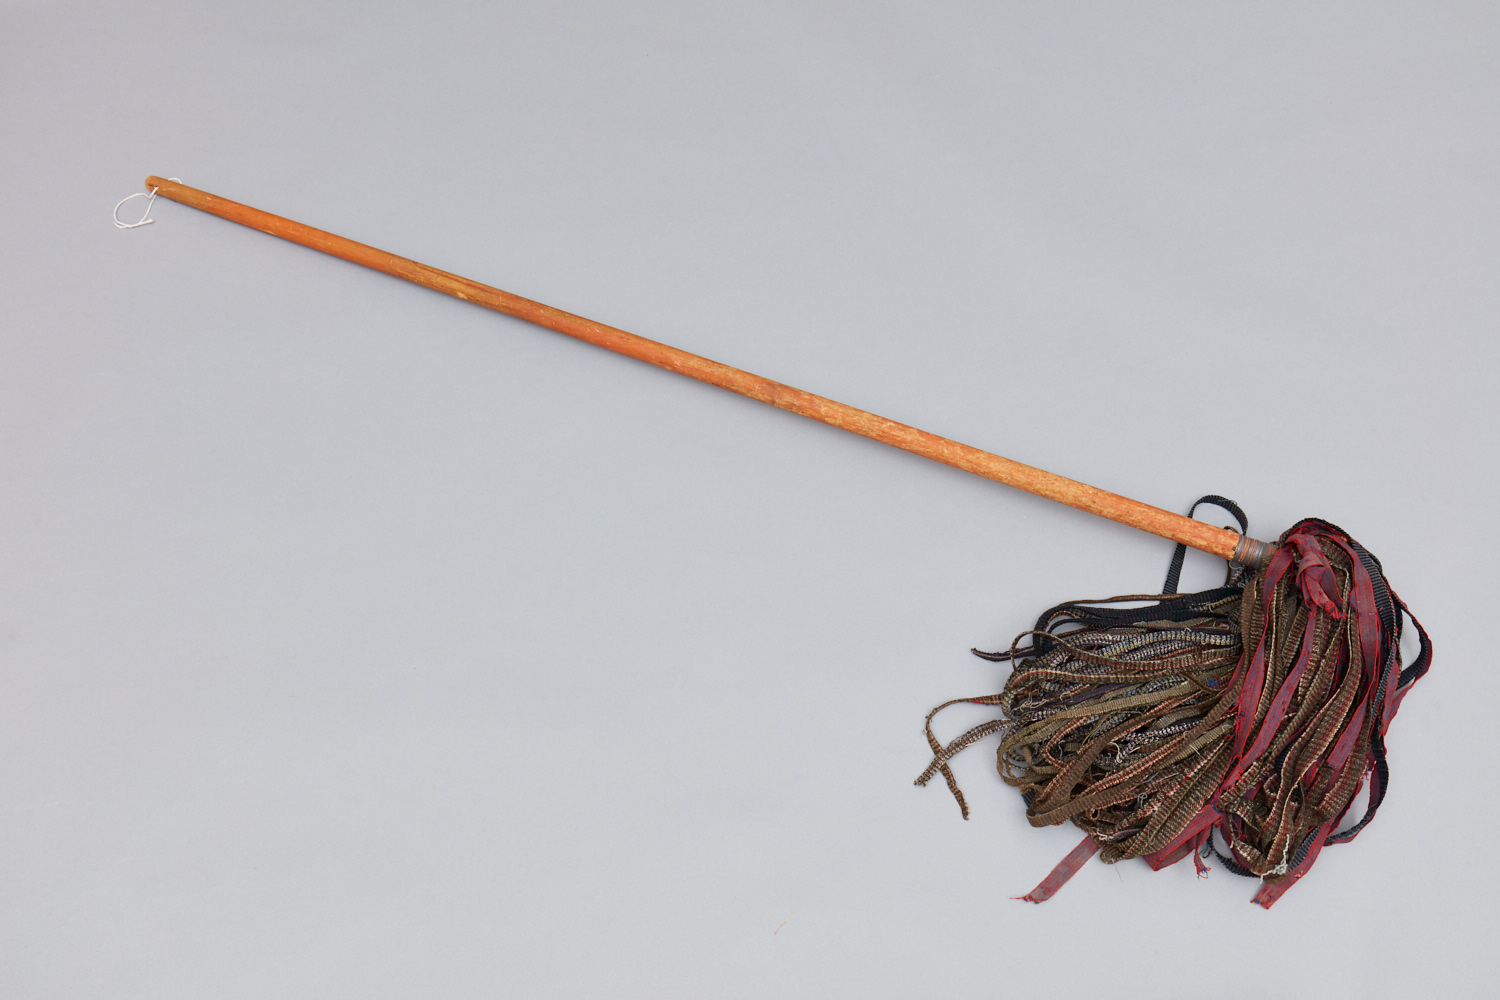 A wooden broom with a wooden handle.